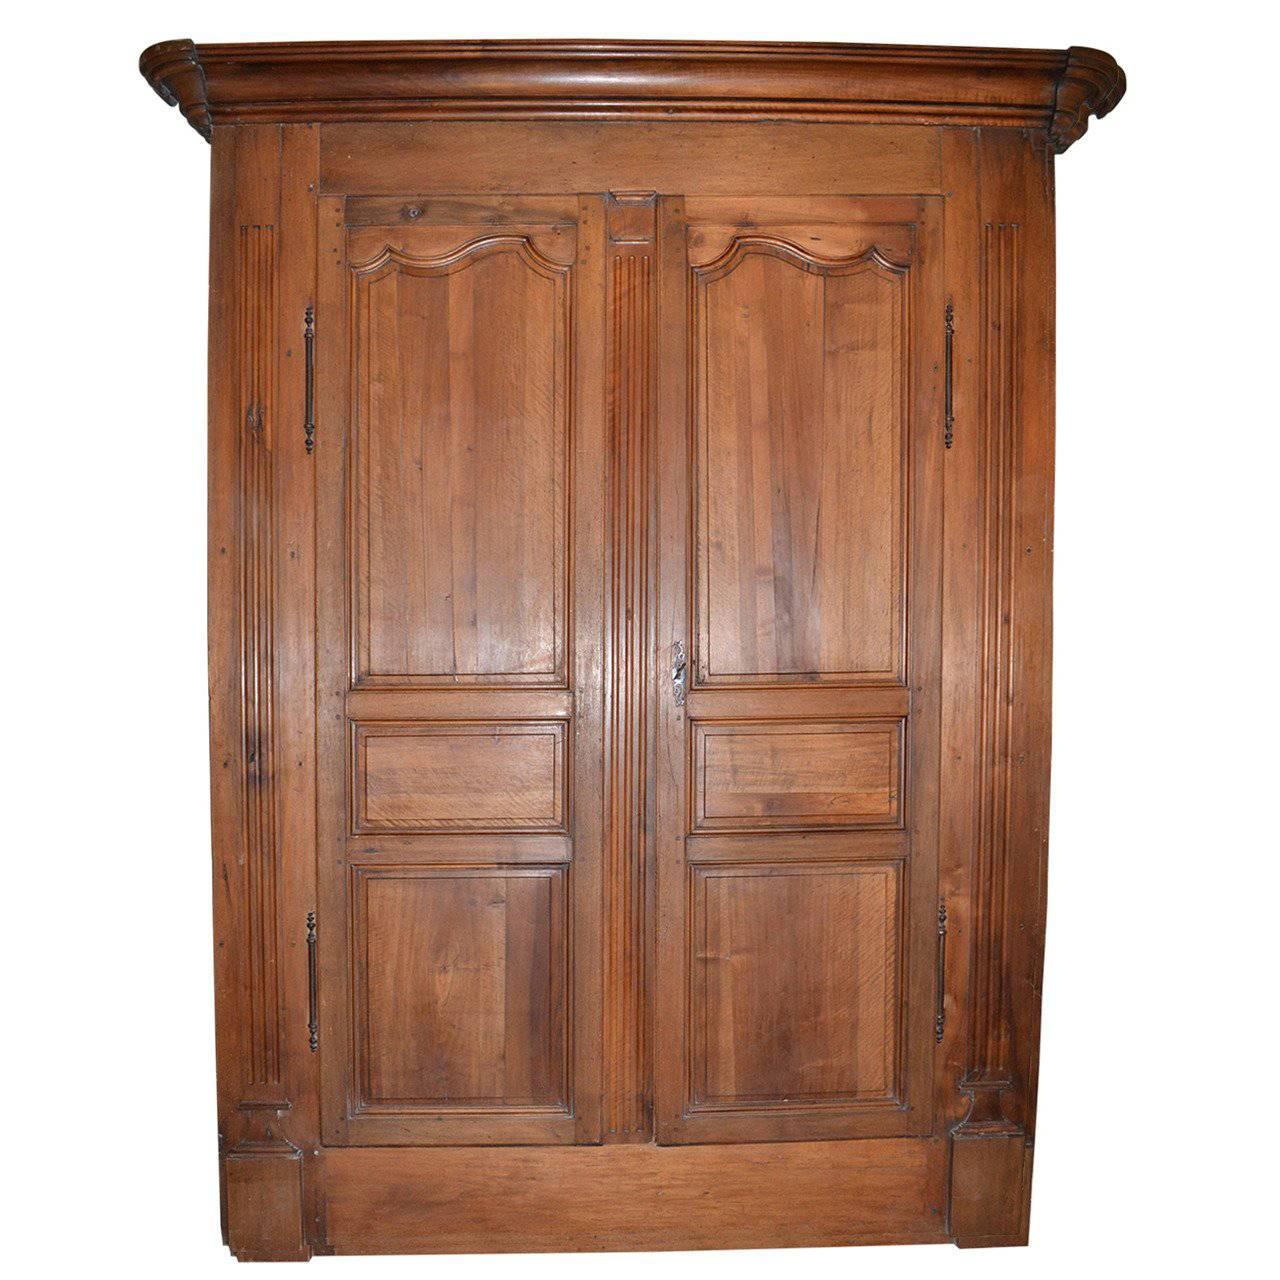 Antique Walnut French Armoire Doors with Original Frame, Crown and Hardware For Sale